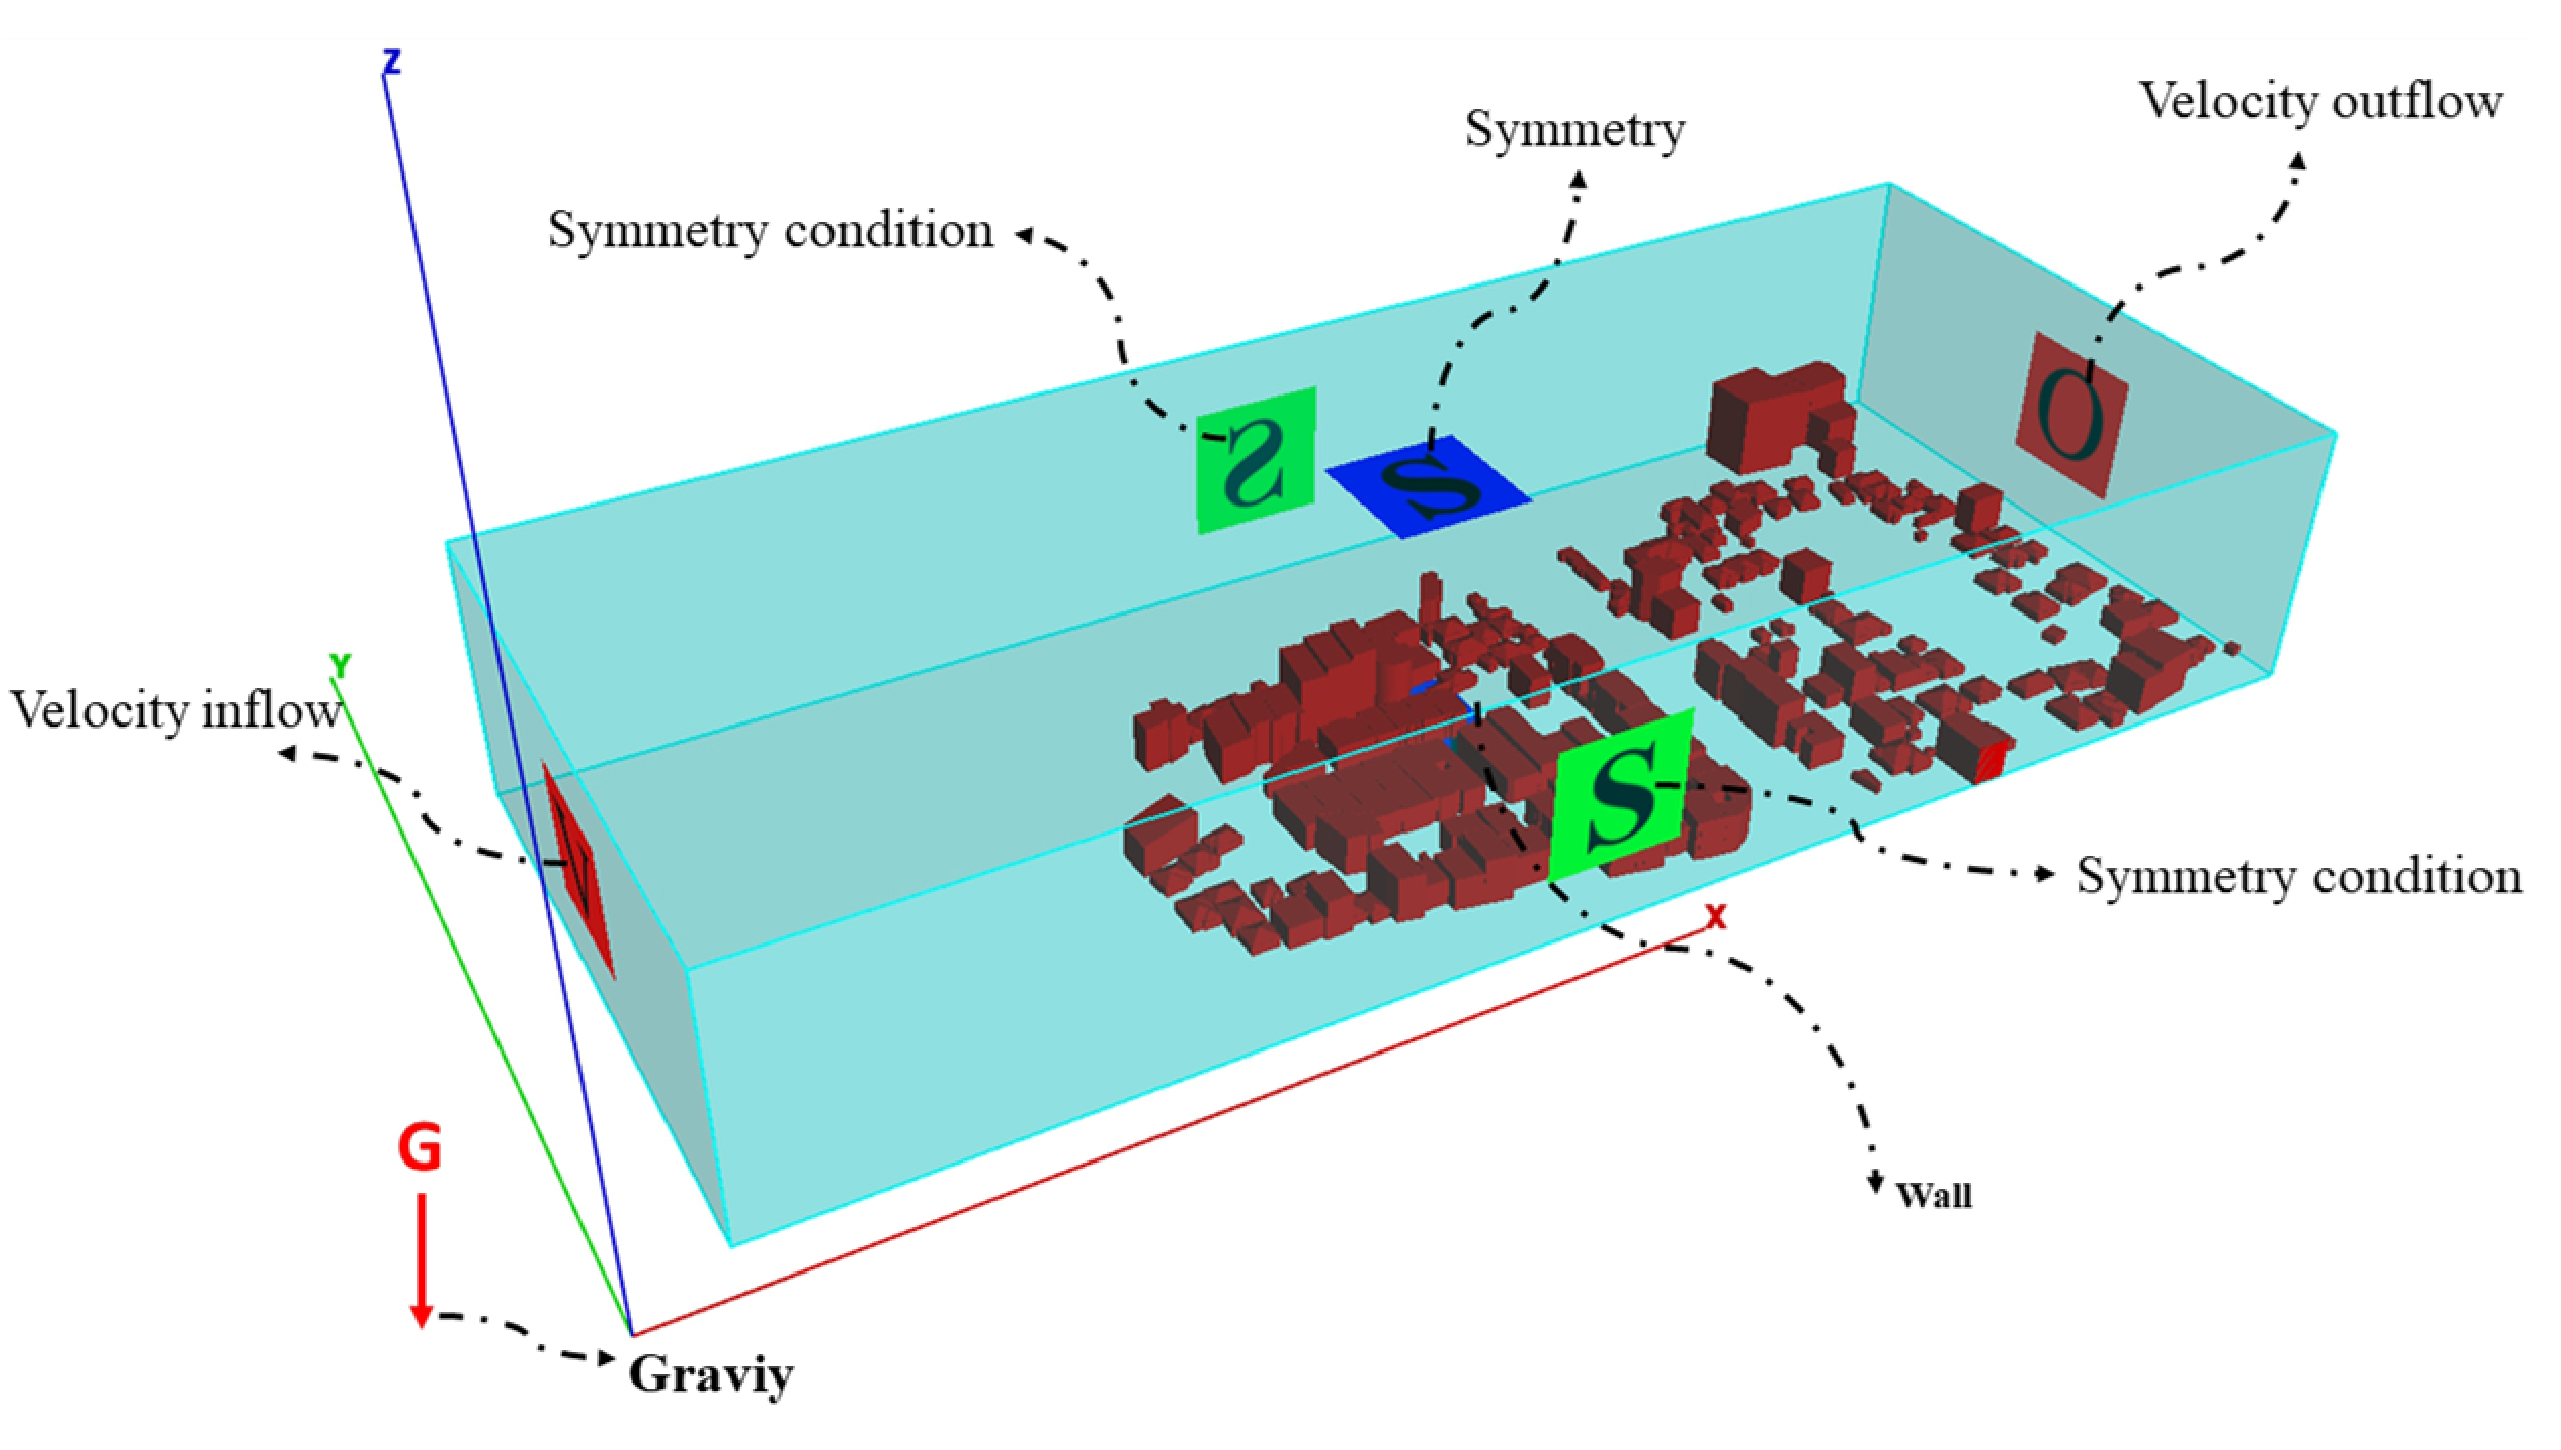 3D view of computational fluid dynamics domain with the sign of main dimensions and boundary conditions.